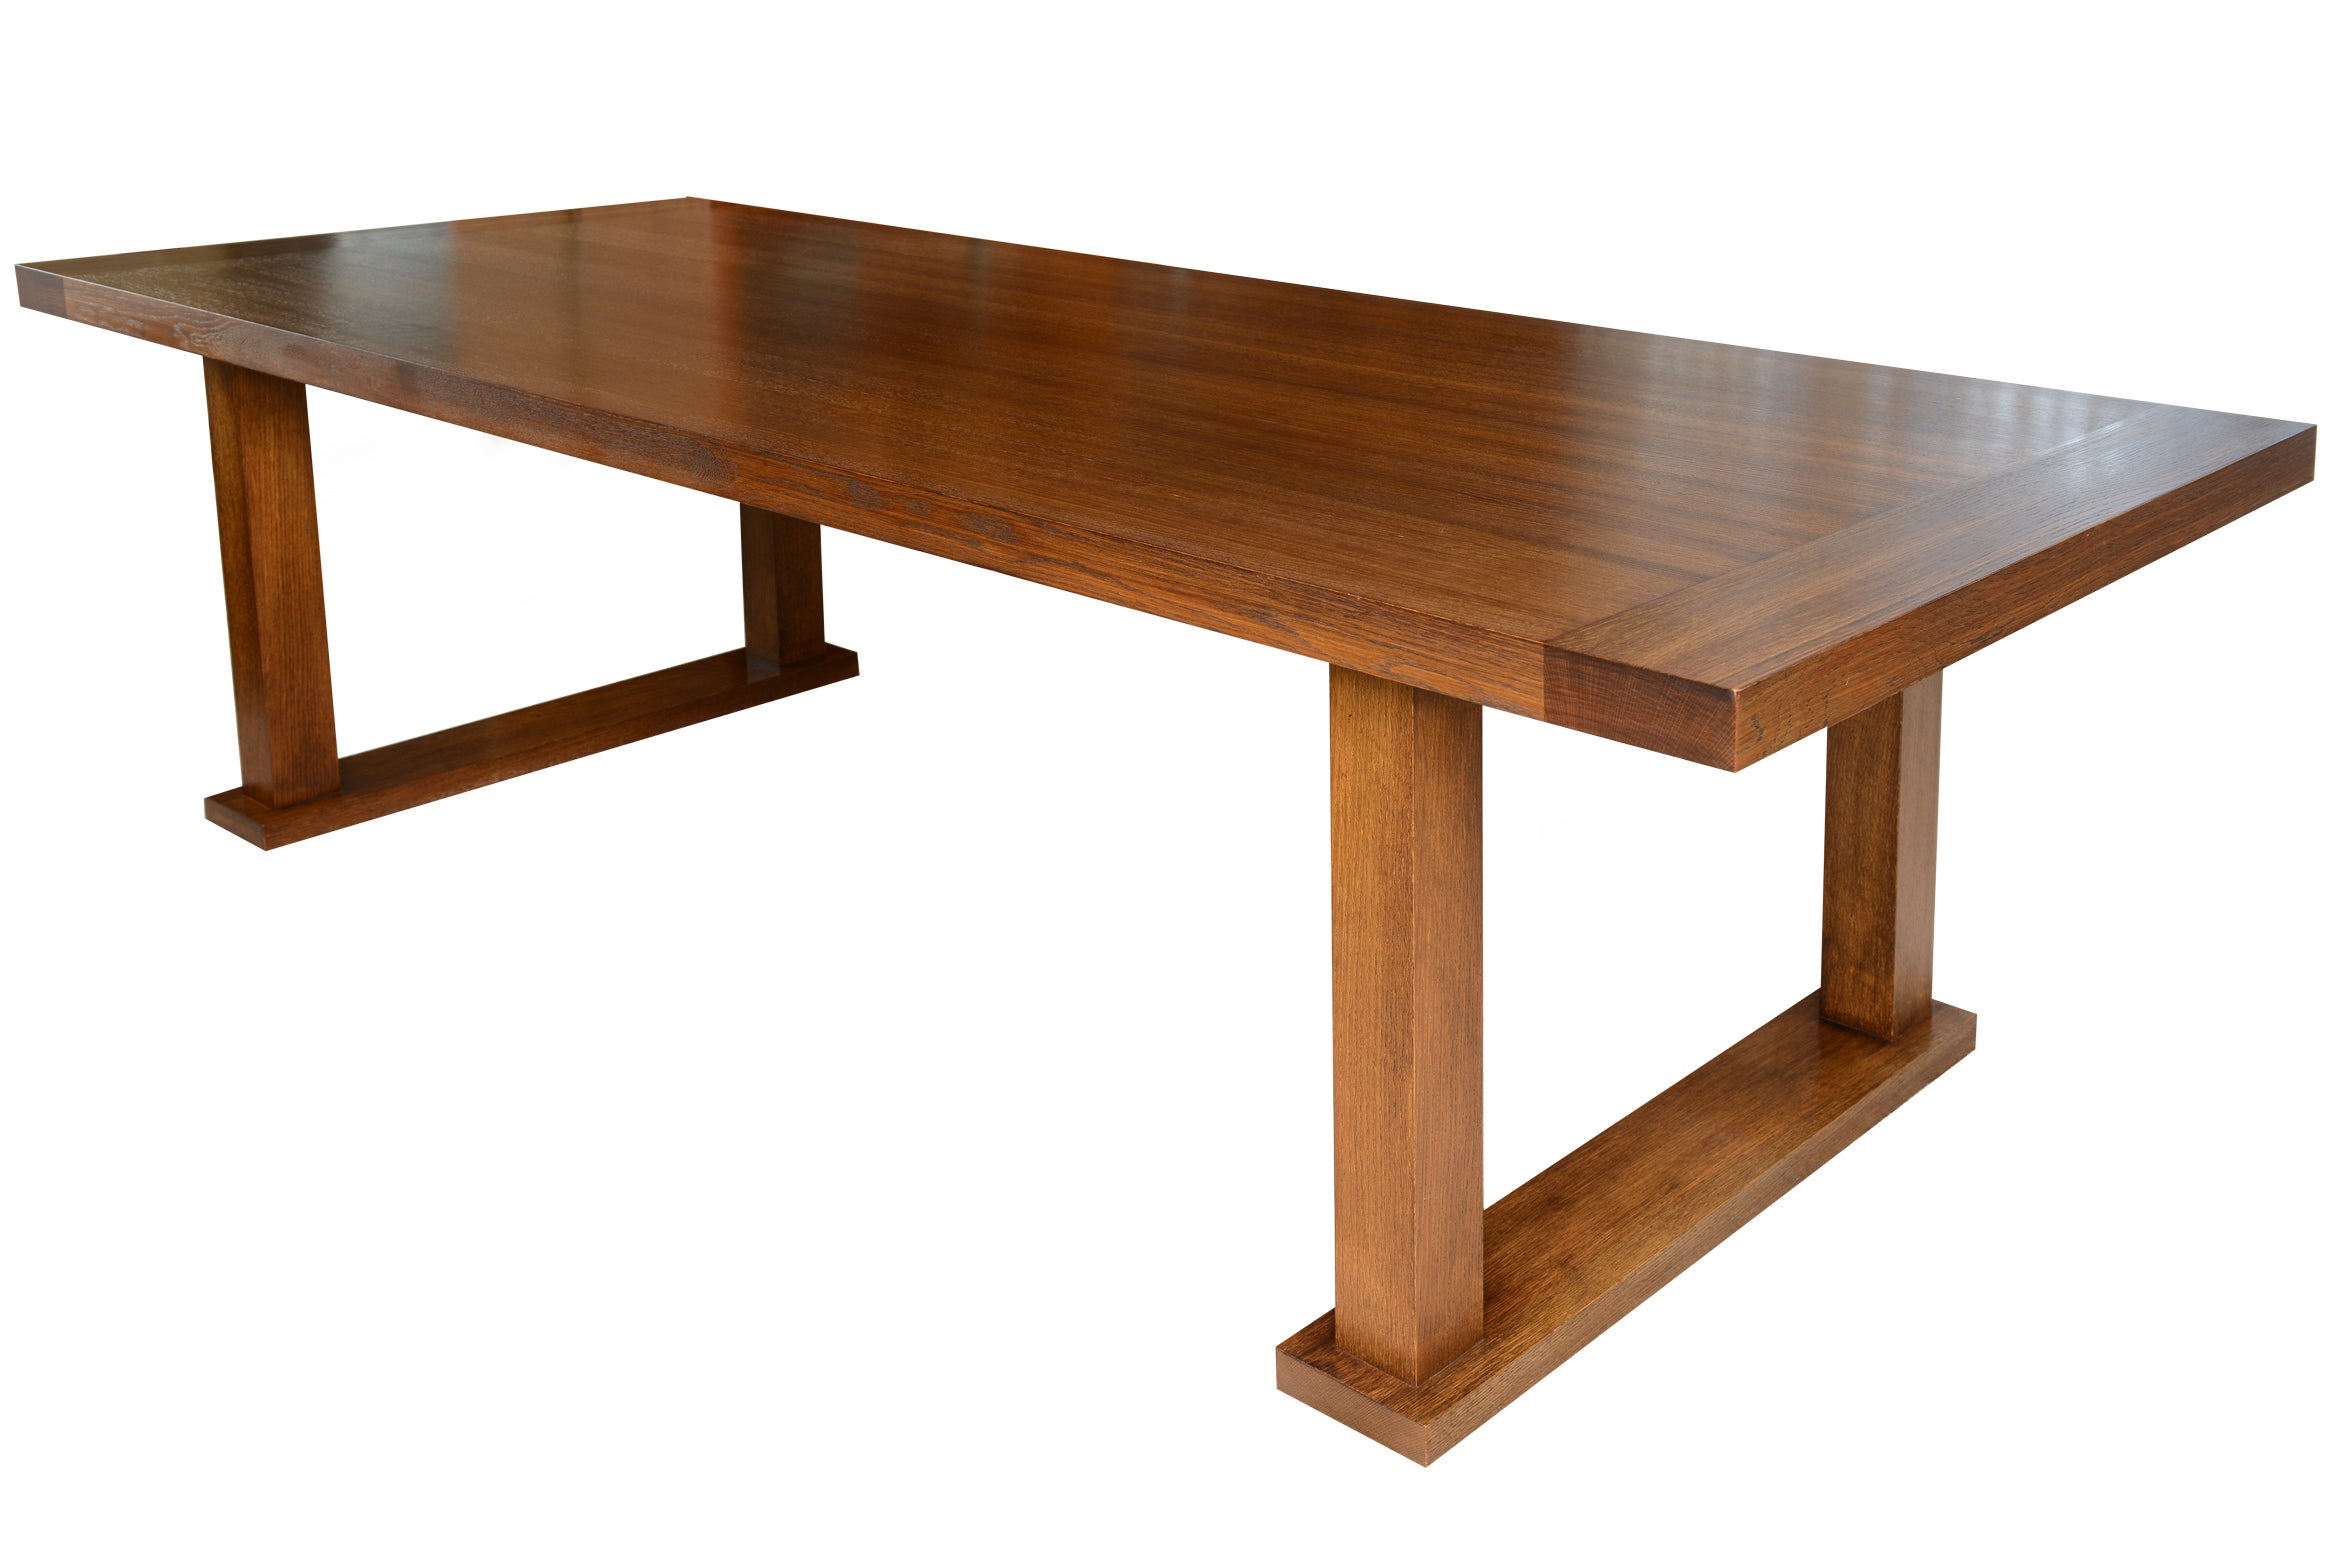 Christian Liaigre "Atelier" Dining Table